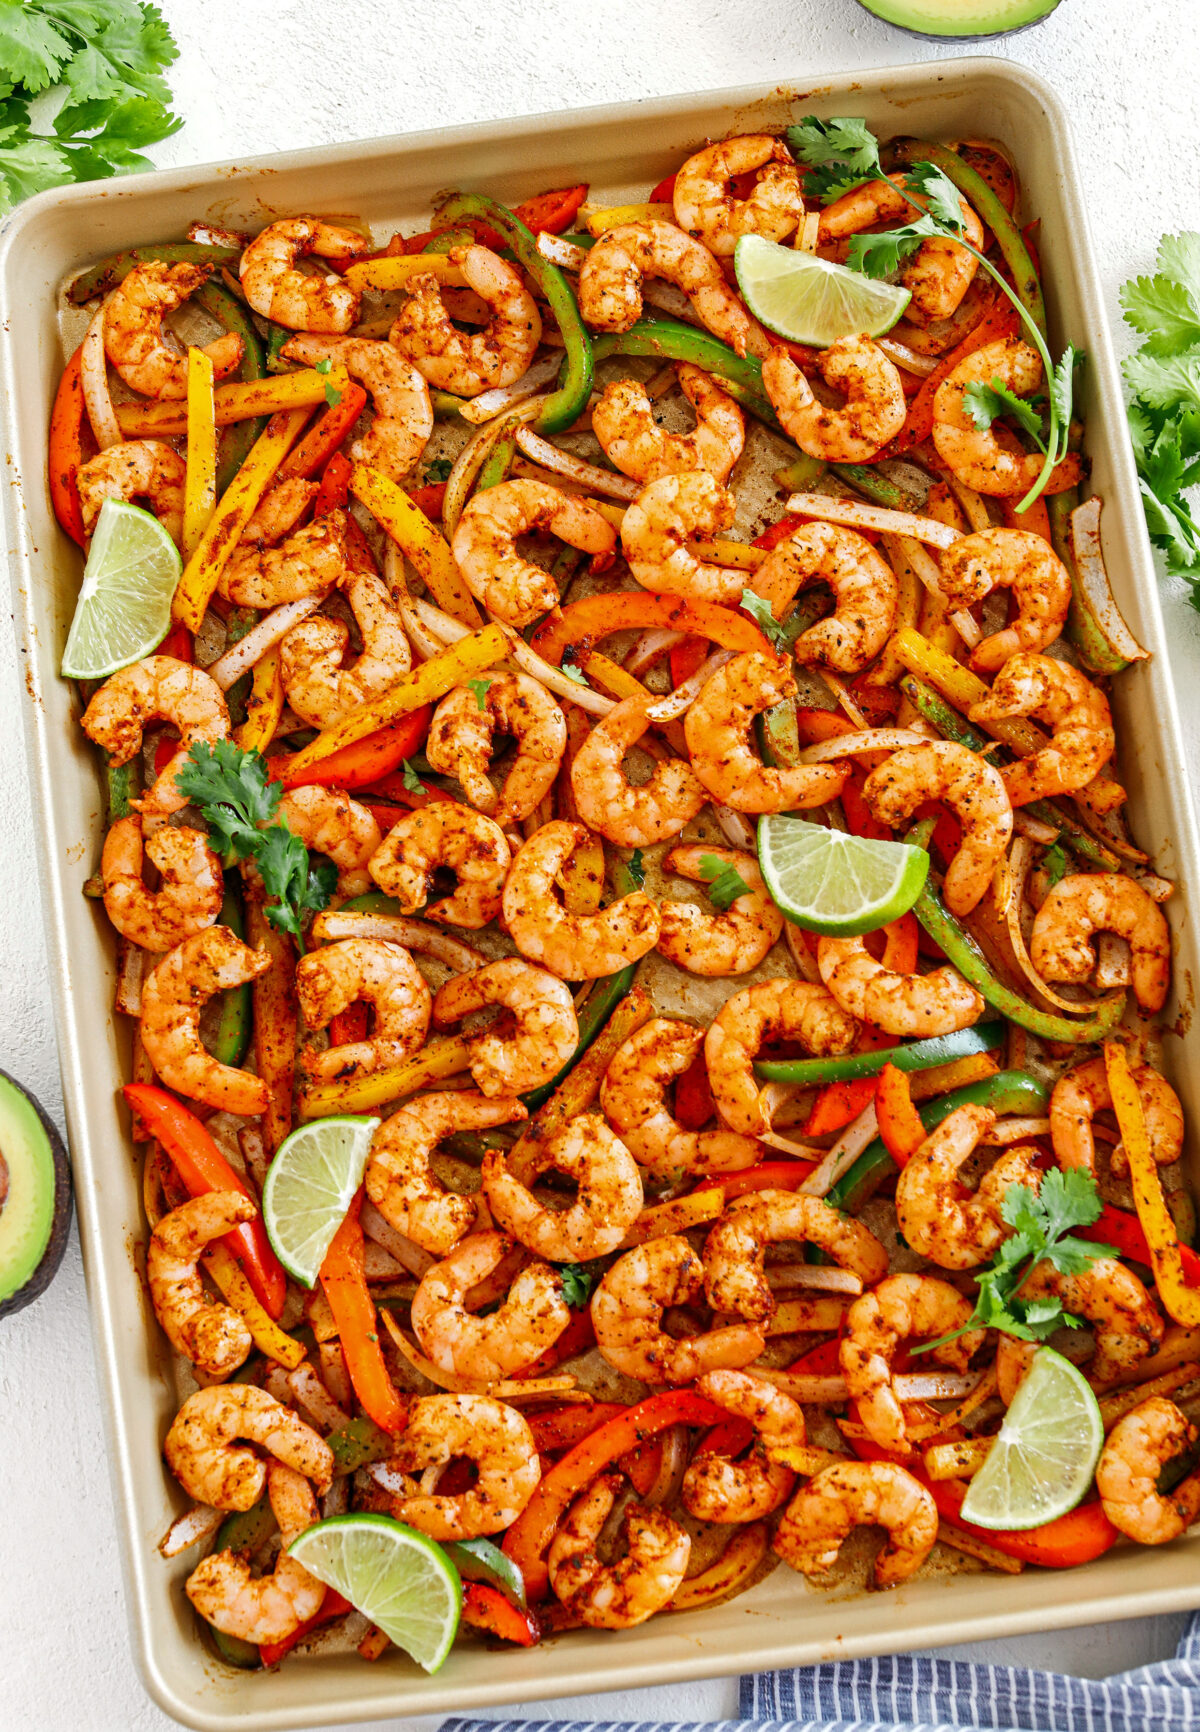 EASY Sheet Pan Shrimp Fajitas with all your favorite Mexican flavors that makes the perfect healthy weeknight dinner easily made all on one pan in under 20 minutes!  Perfect recipe for your Sunday meal prep too!  